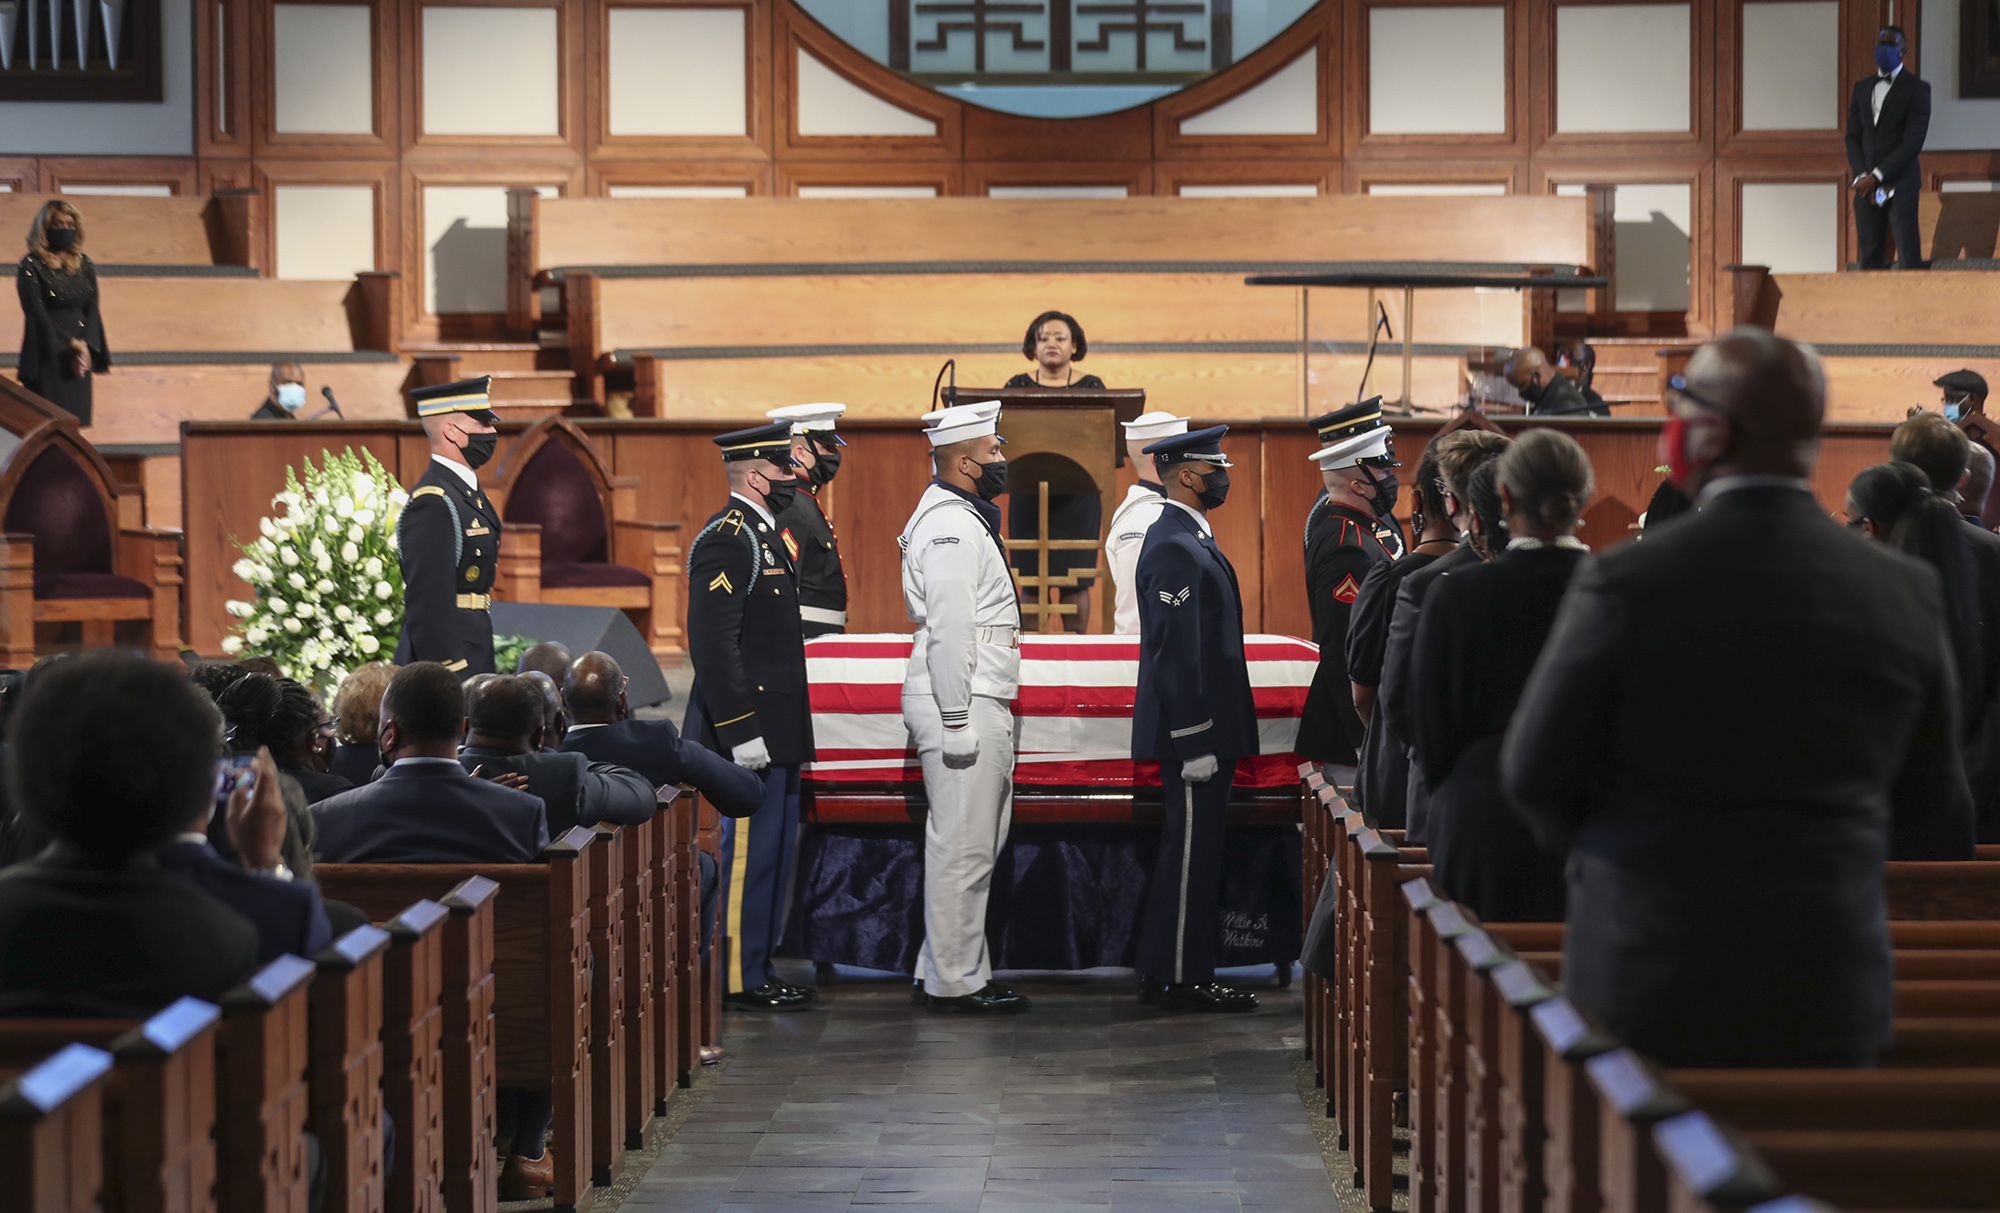 The Honor Guard carries the body of John Lewis after the service in Atlanta on July 30.